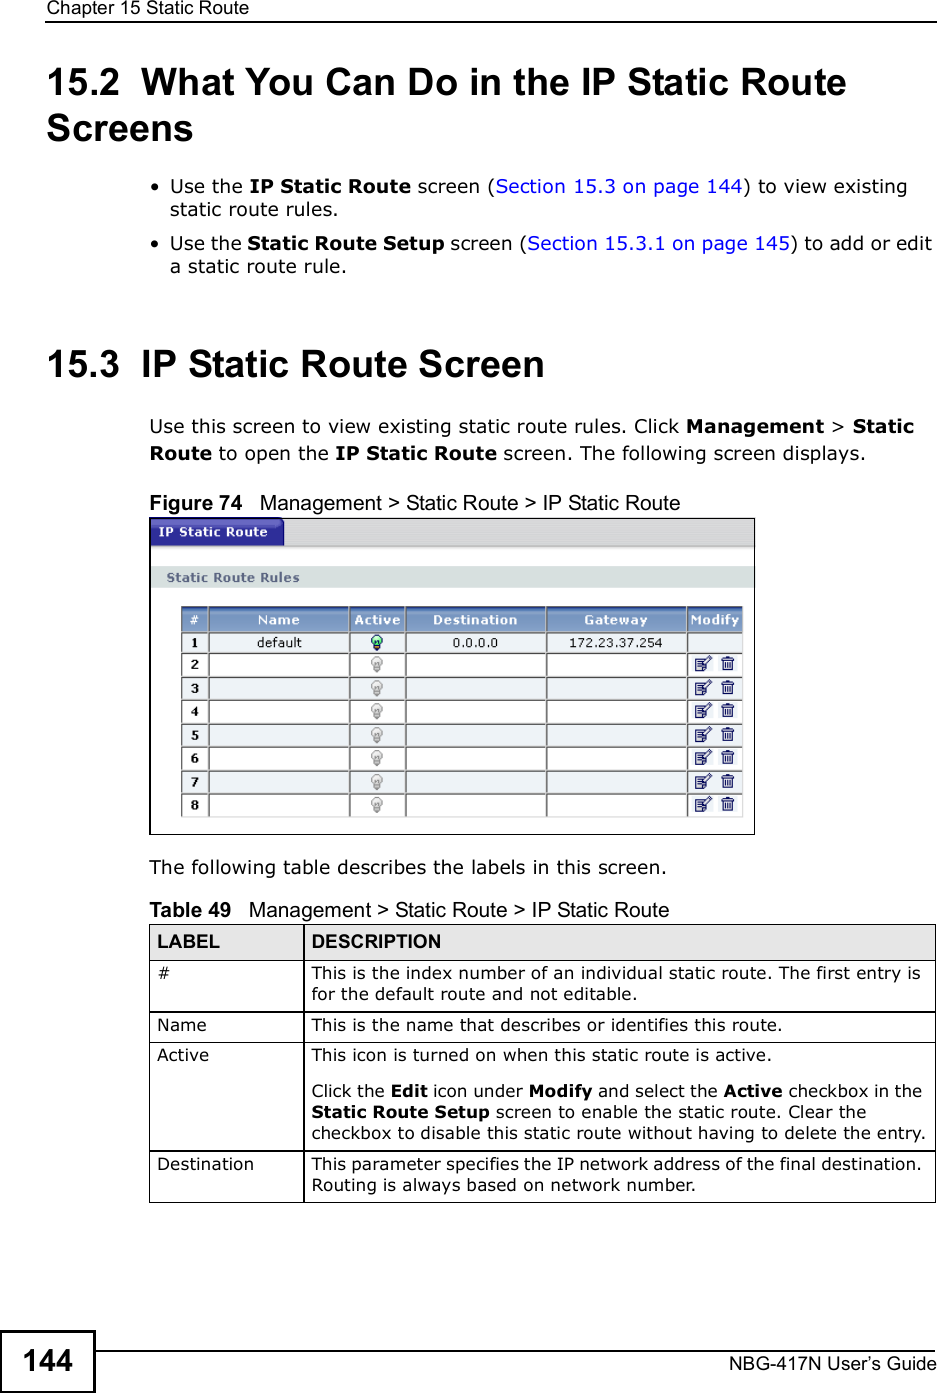 Chapter 15Static RouteNBG-417N User s Guide14415.2  What You Can Do in the IP Static Route Screens Use the IP Static Route screen (Section 15.3 on page 144) to view existing static route rules. Use the Static Route Setup screen (Section 15.3.1 on page 145) to add or edit a static route rule.15.3  IP Static Route ScreenUse this screen to view existing static route rules. Click Management &gt; Static Route to open the IP Static Route screen. The following screen displays.Figure 74   Management &gt; Static Route &gt; IP Static RouteThe following table describes the labels in this screen.Table 49   Management &gt; Static Route &gt; IP Static RouteLABEL DESCRIPTION#This is the index number of an individual static route. The first entry is for the default route and not editable.Name This is the name that describes or identifies this route. Active This icon is turned on when this static route is active.Click the Edit icon under Modify and select the Active checkbox in the Static Route Setup screen to enable the static route. Clear the checkbox to disable this static route without having to delete the entry.Destination This parameter specifies the IP network address of the final destination. Routing is always based on network number. 